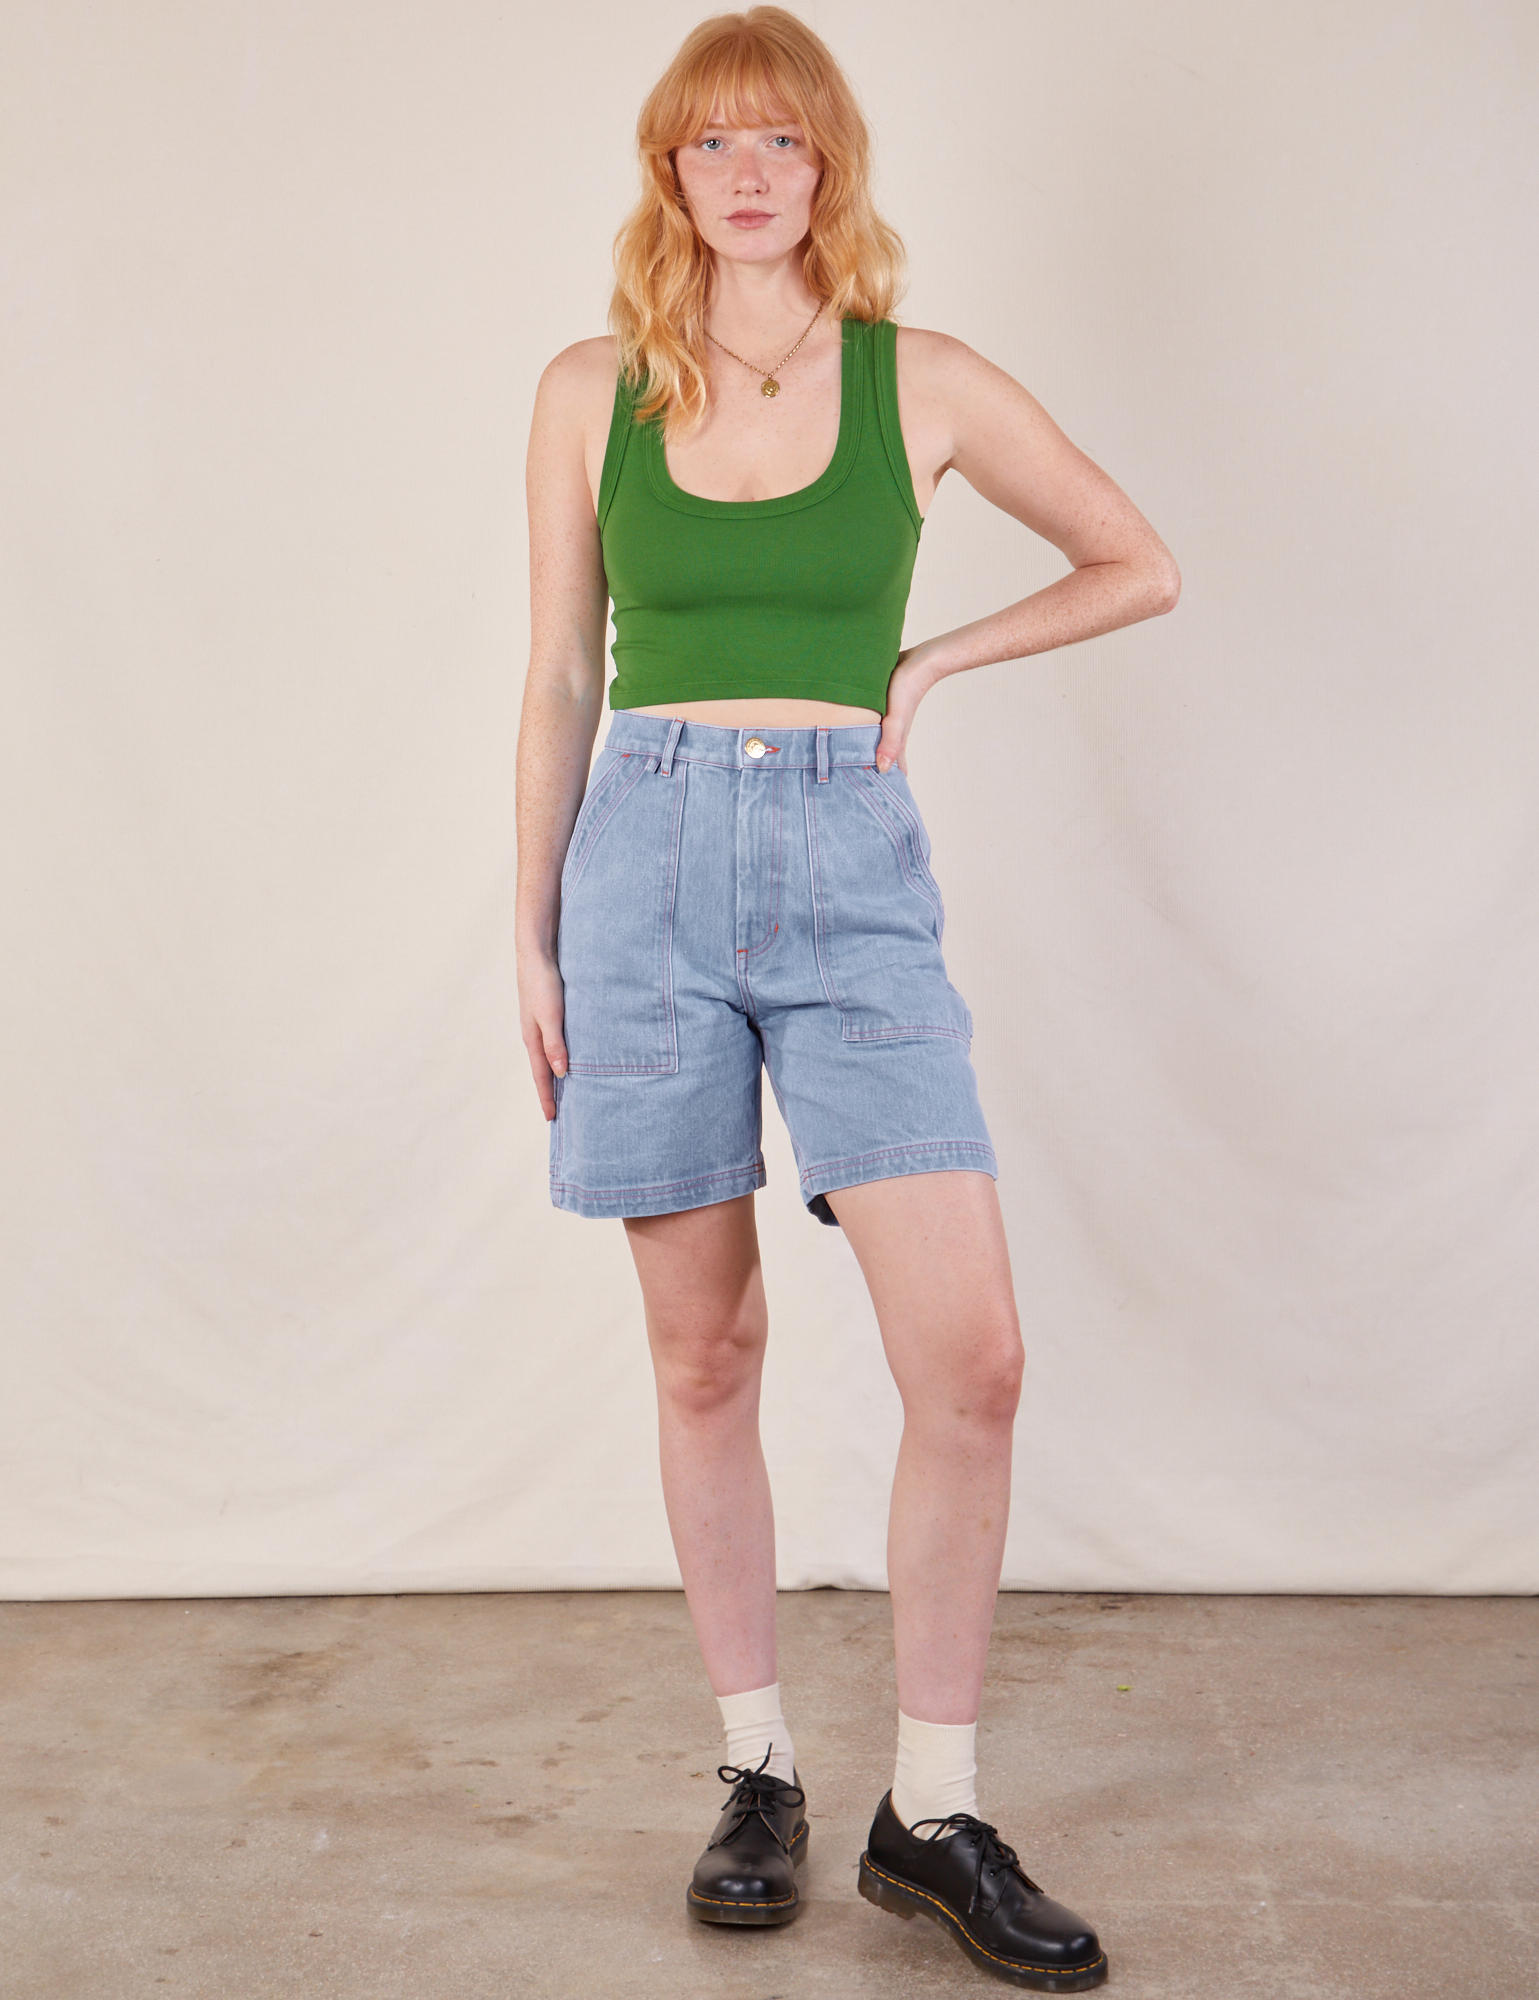 Margaret is 5'11" and wearing XS Carpenter Shorts in Light Wash paired with a lawn green Cropped Tank